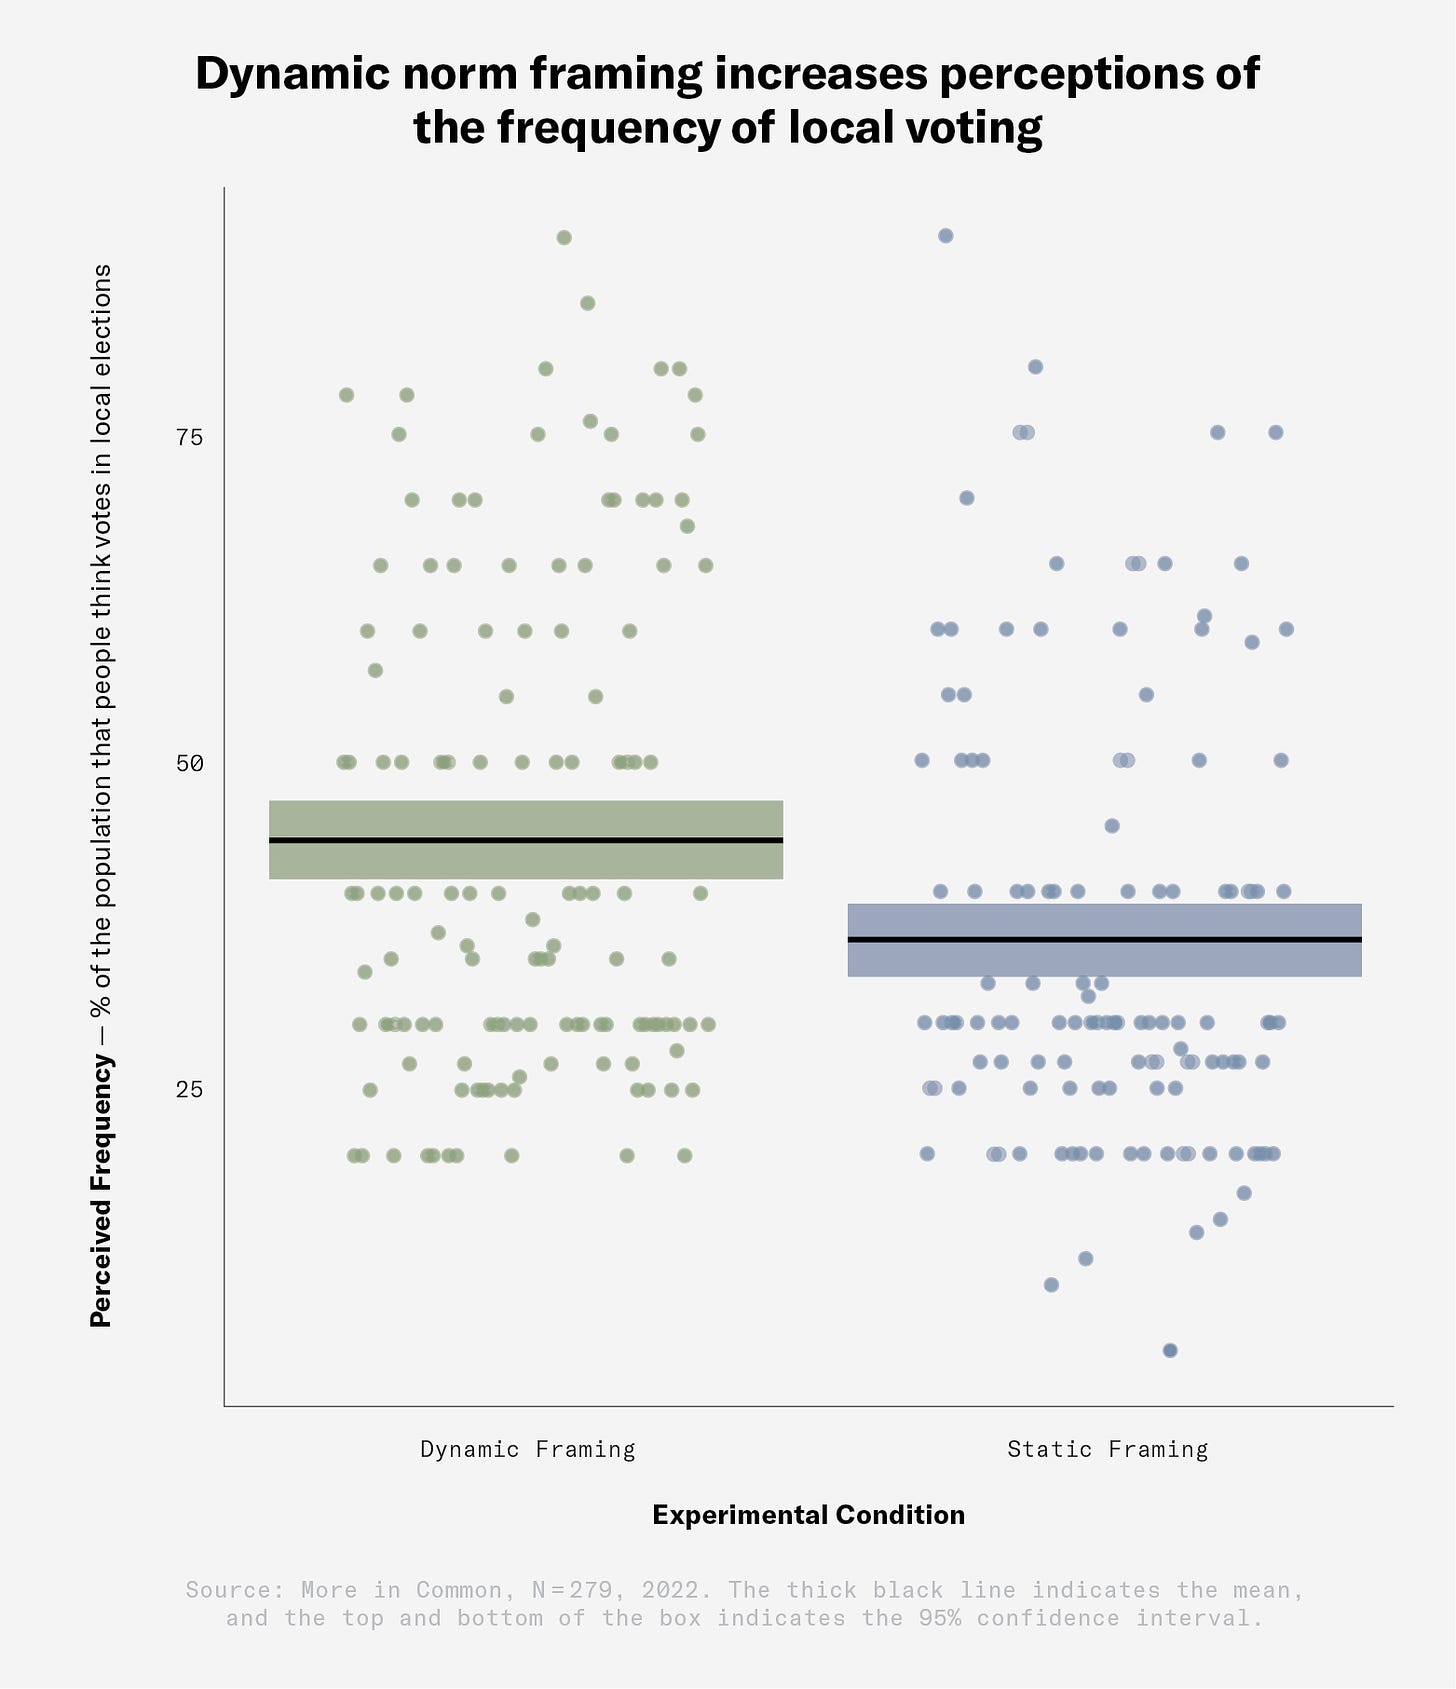 Dynamic norm framing increases perception of the frequency of local voting